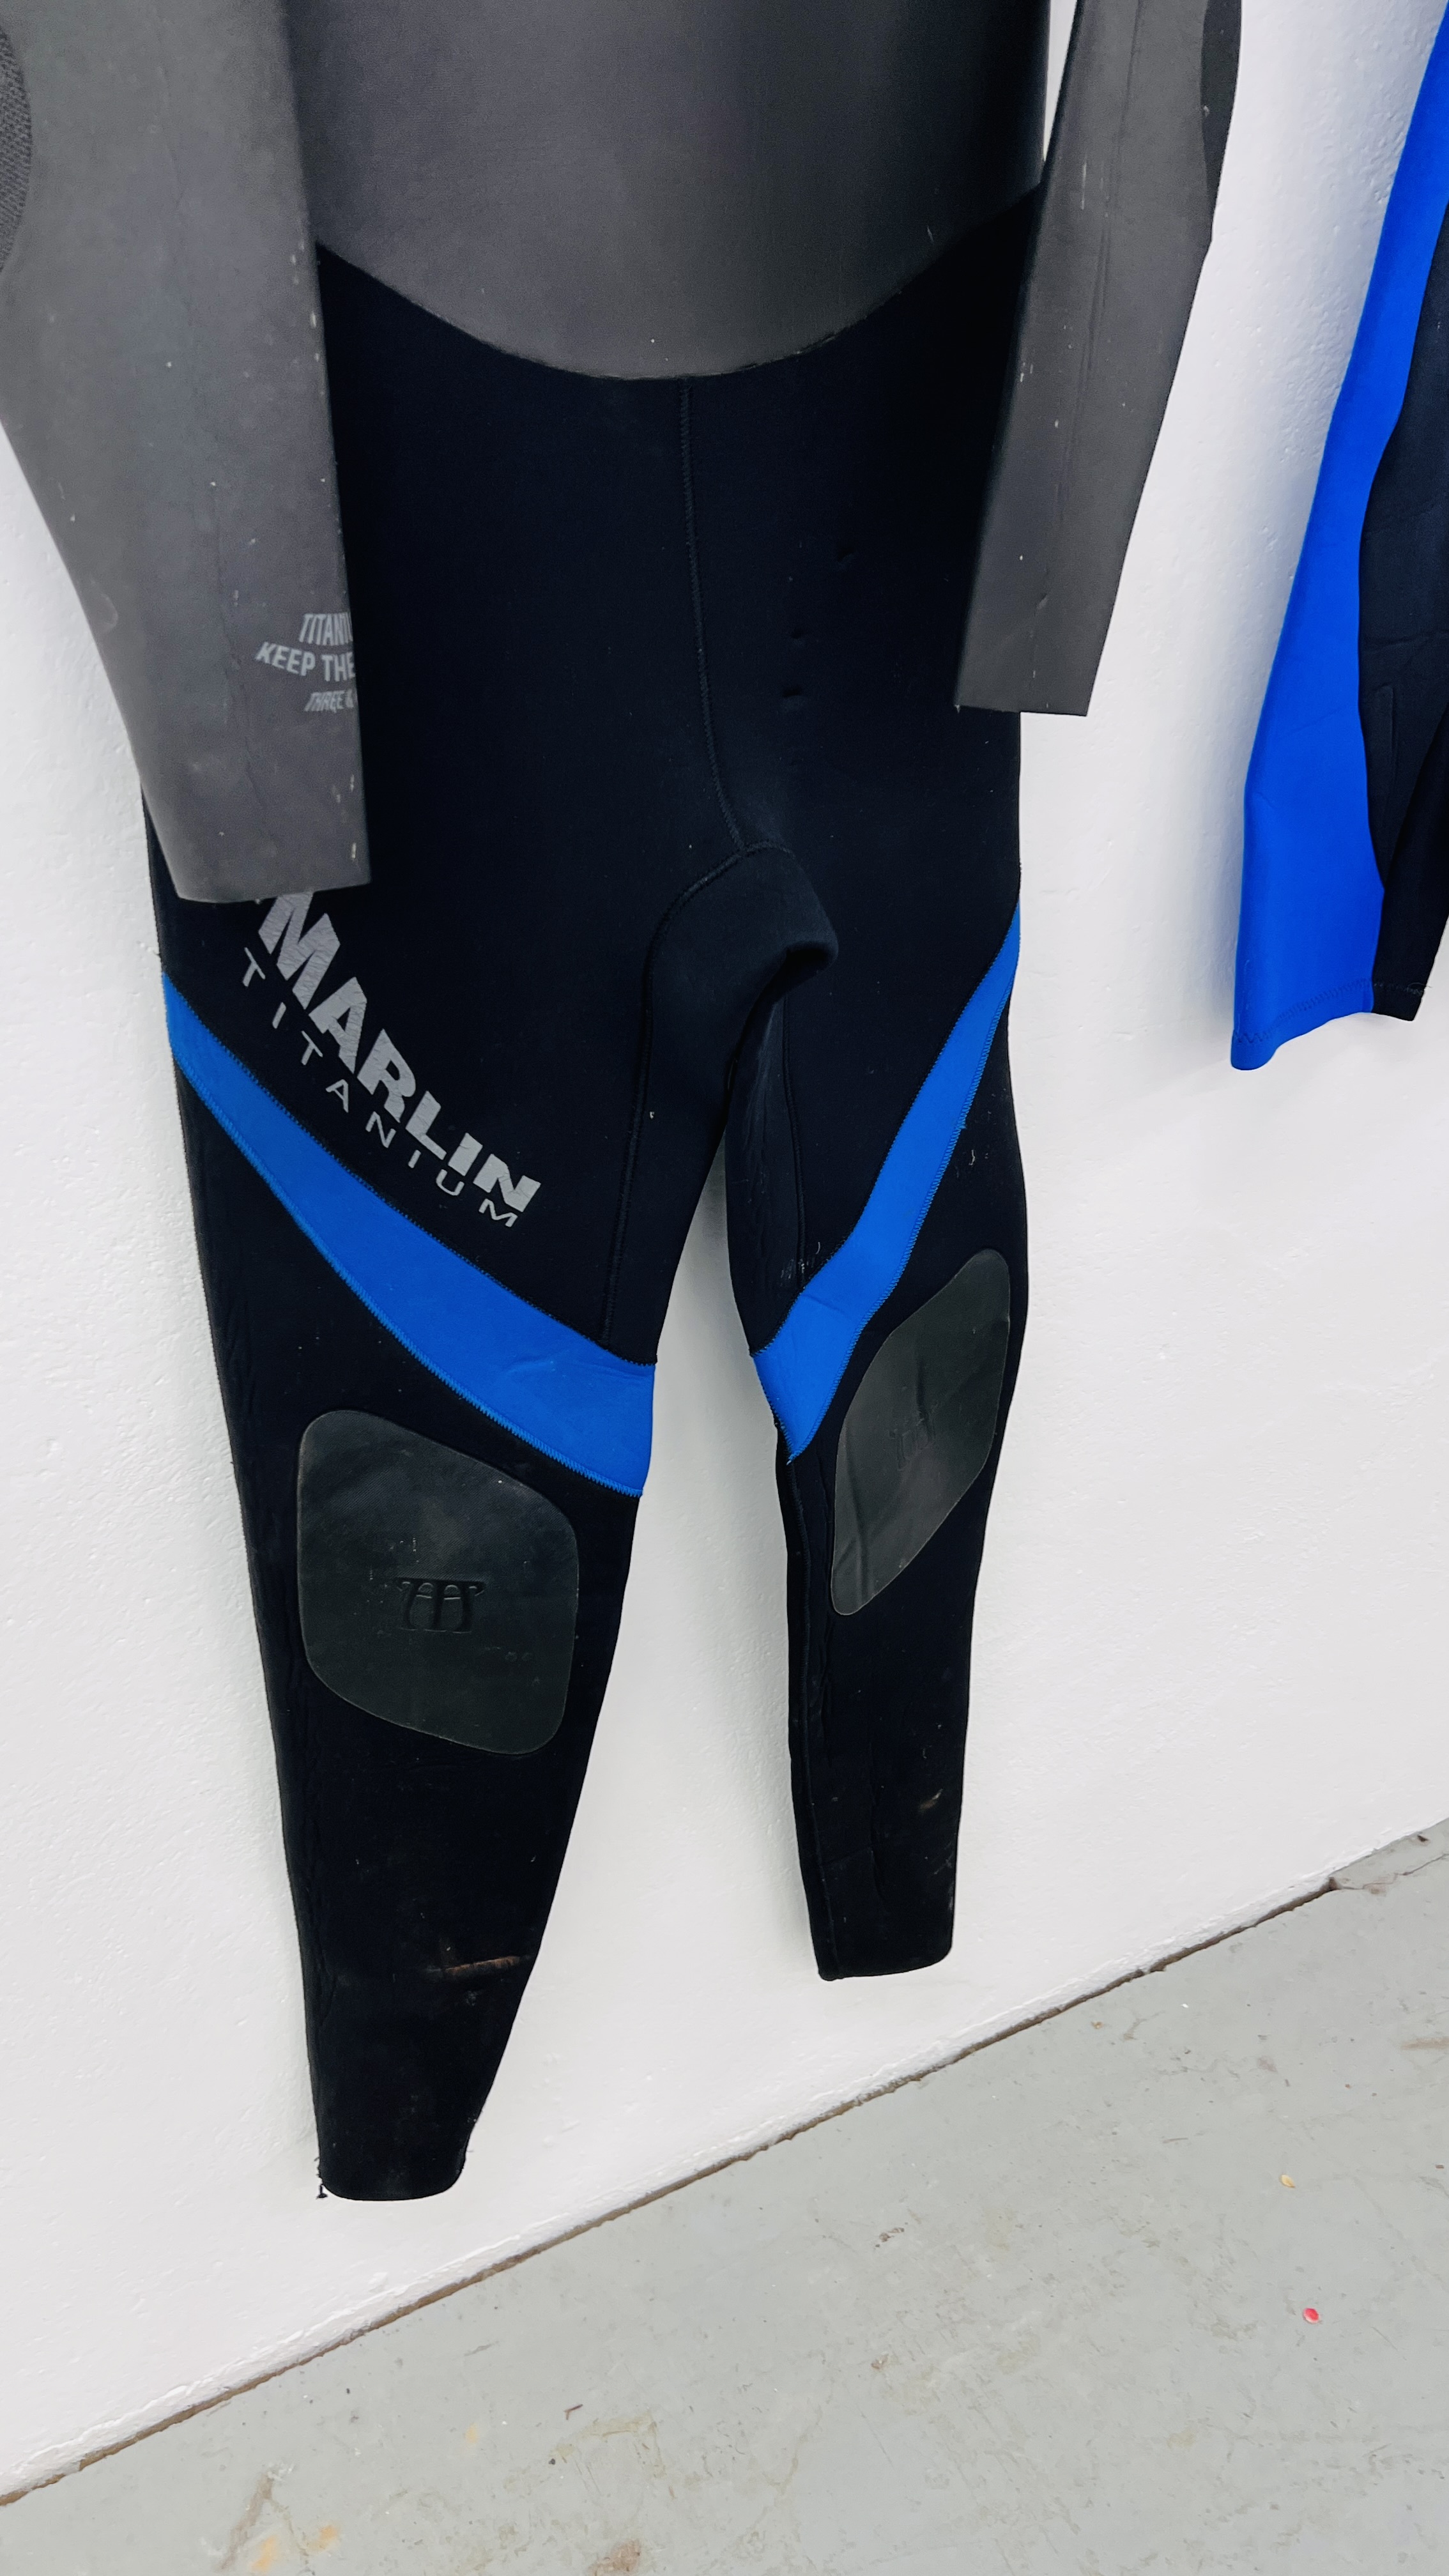 2 X MARLIN GENTS WETSUITS. - Image 3 of 4